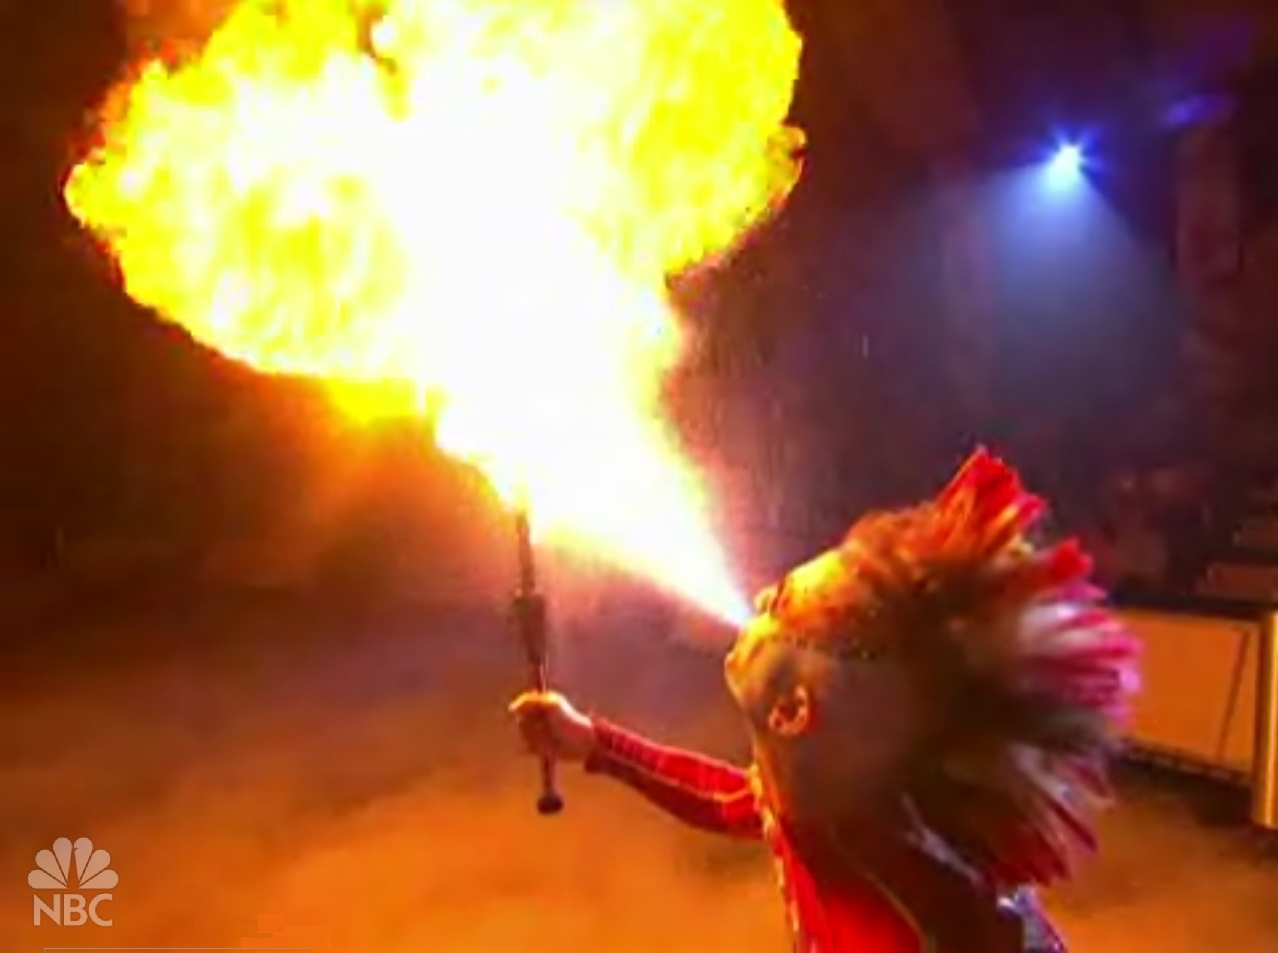 Fire Breathing on NBC's 